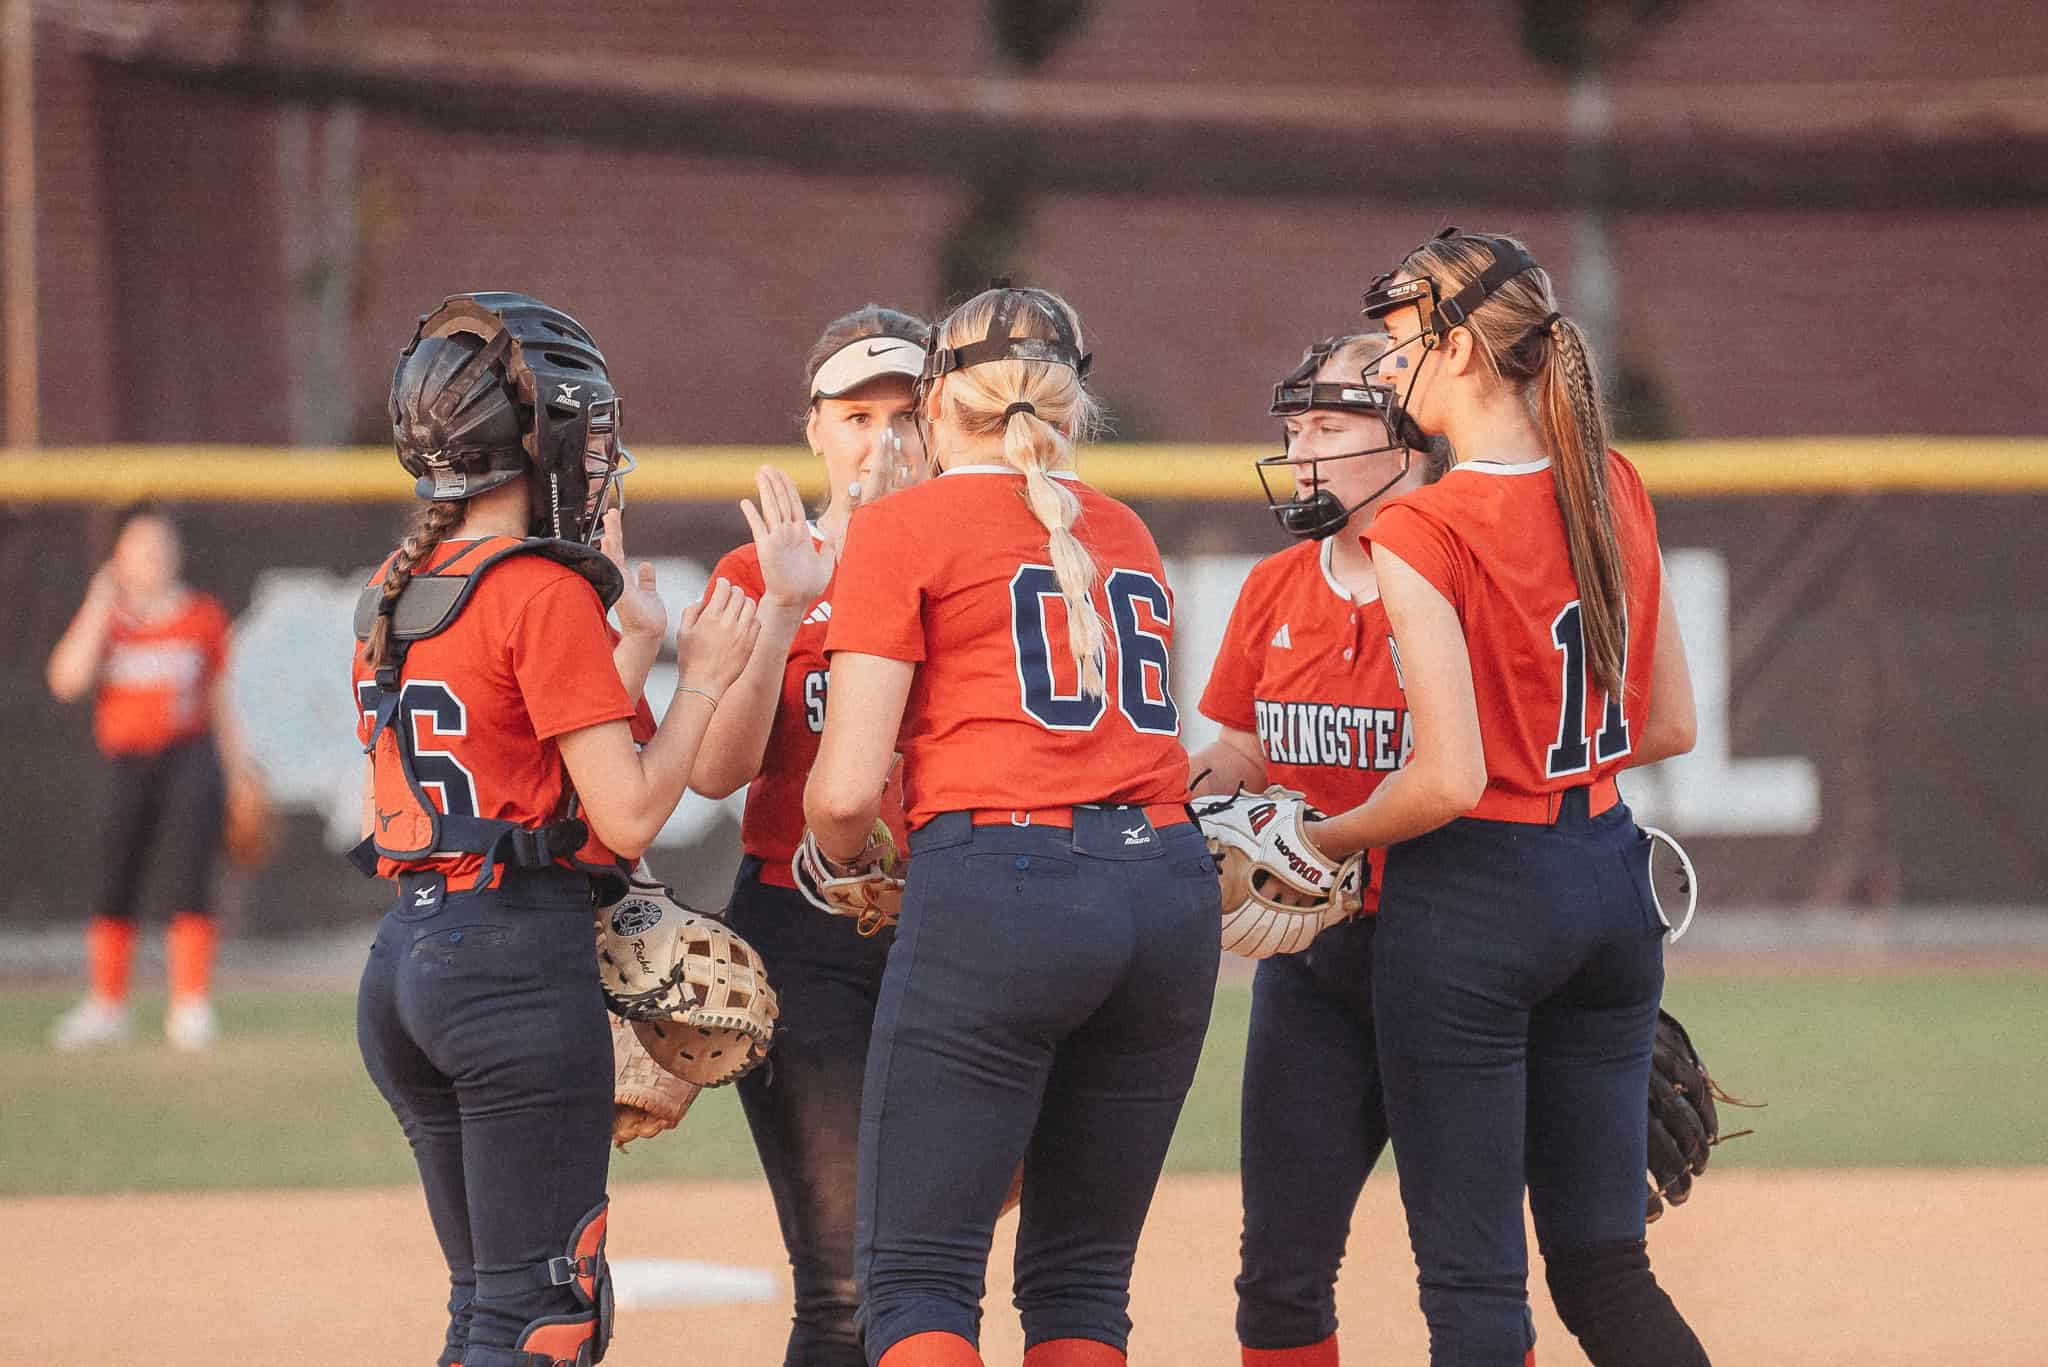 Springstead players convene on the mound. [Photo by Cynthia Leota]